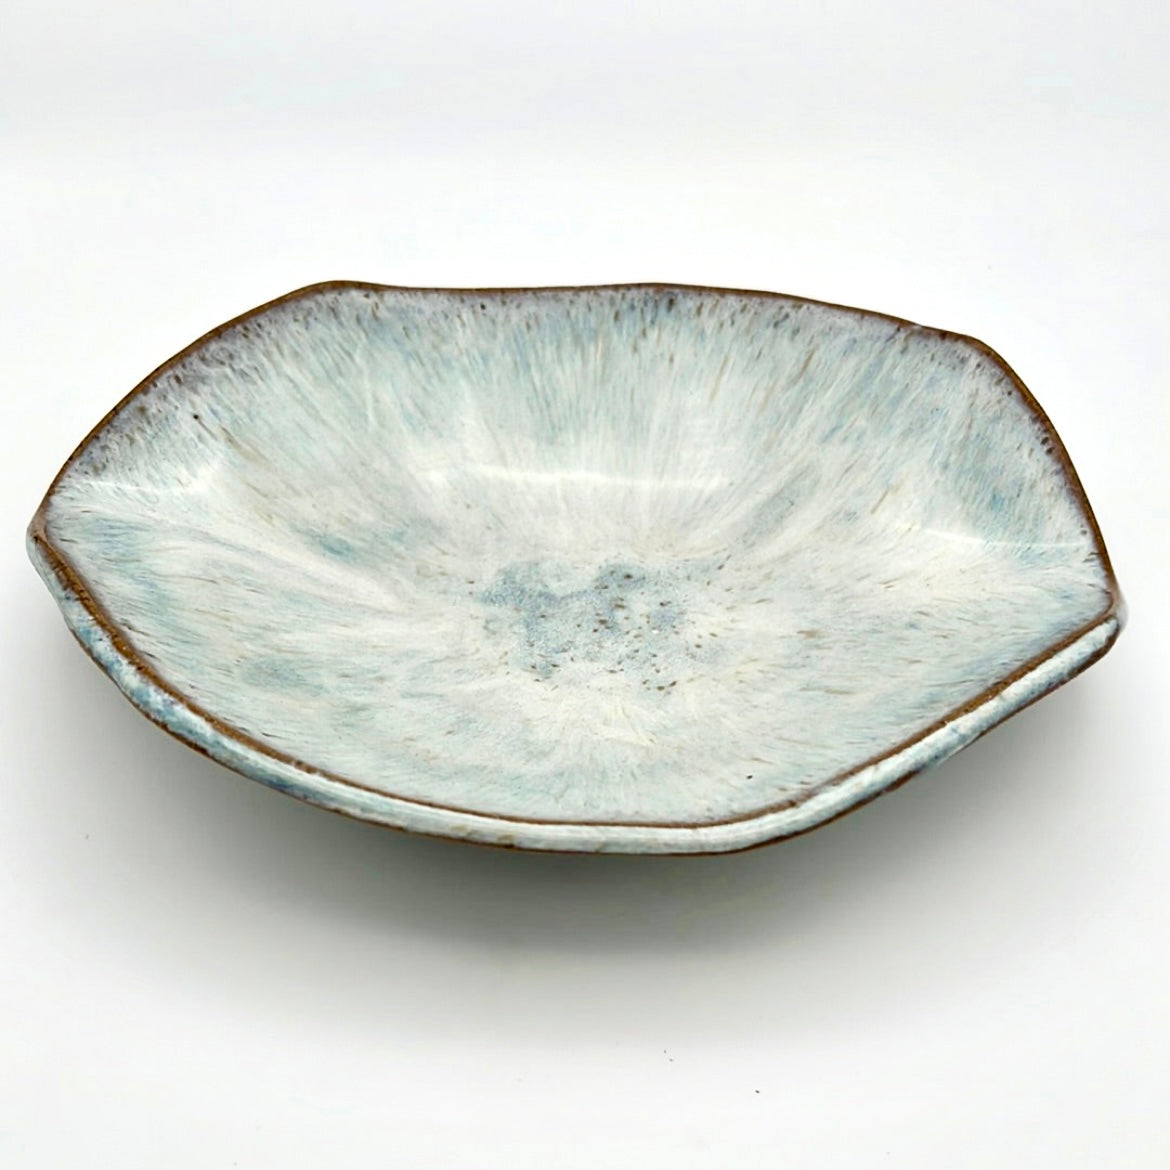 Decorative Accent Serving Dish | ROCK HOME Collection | 9.5” long x 7.5” wide x 2.5” tall